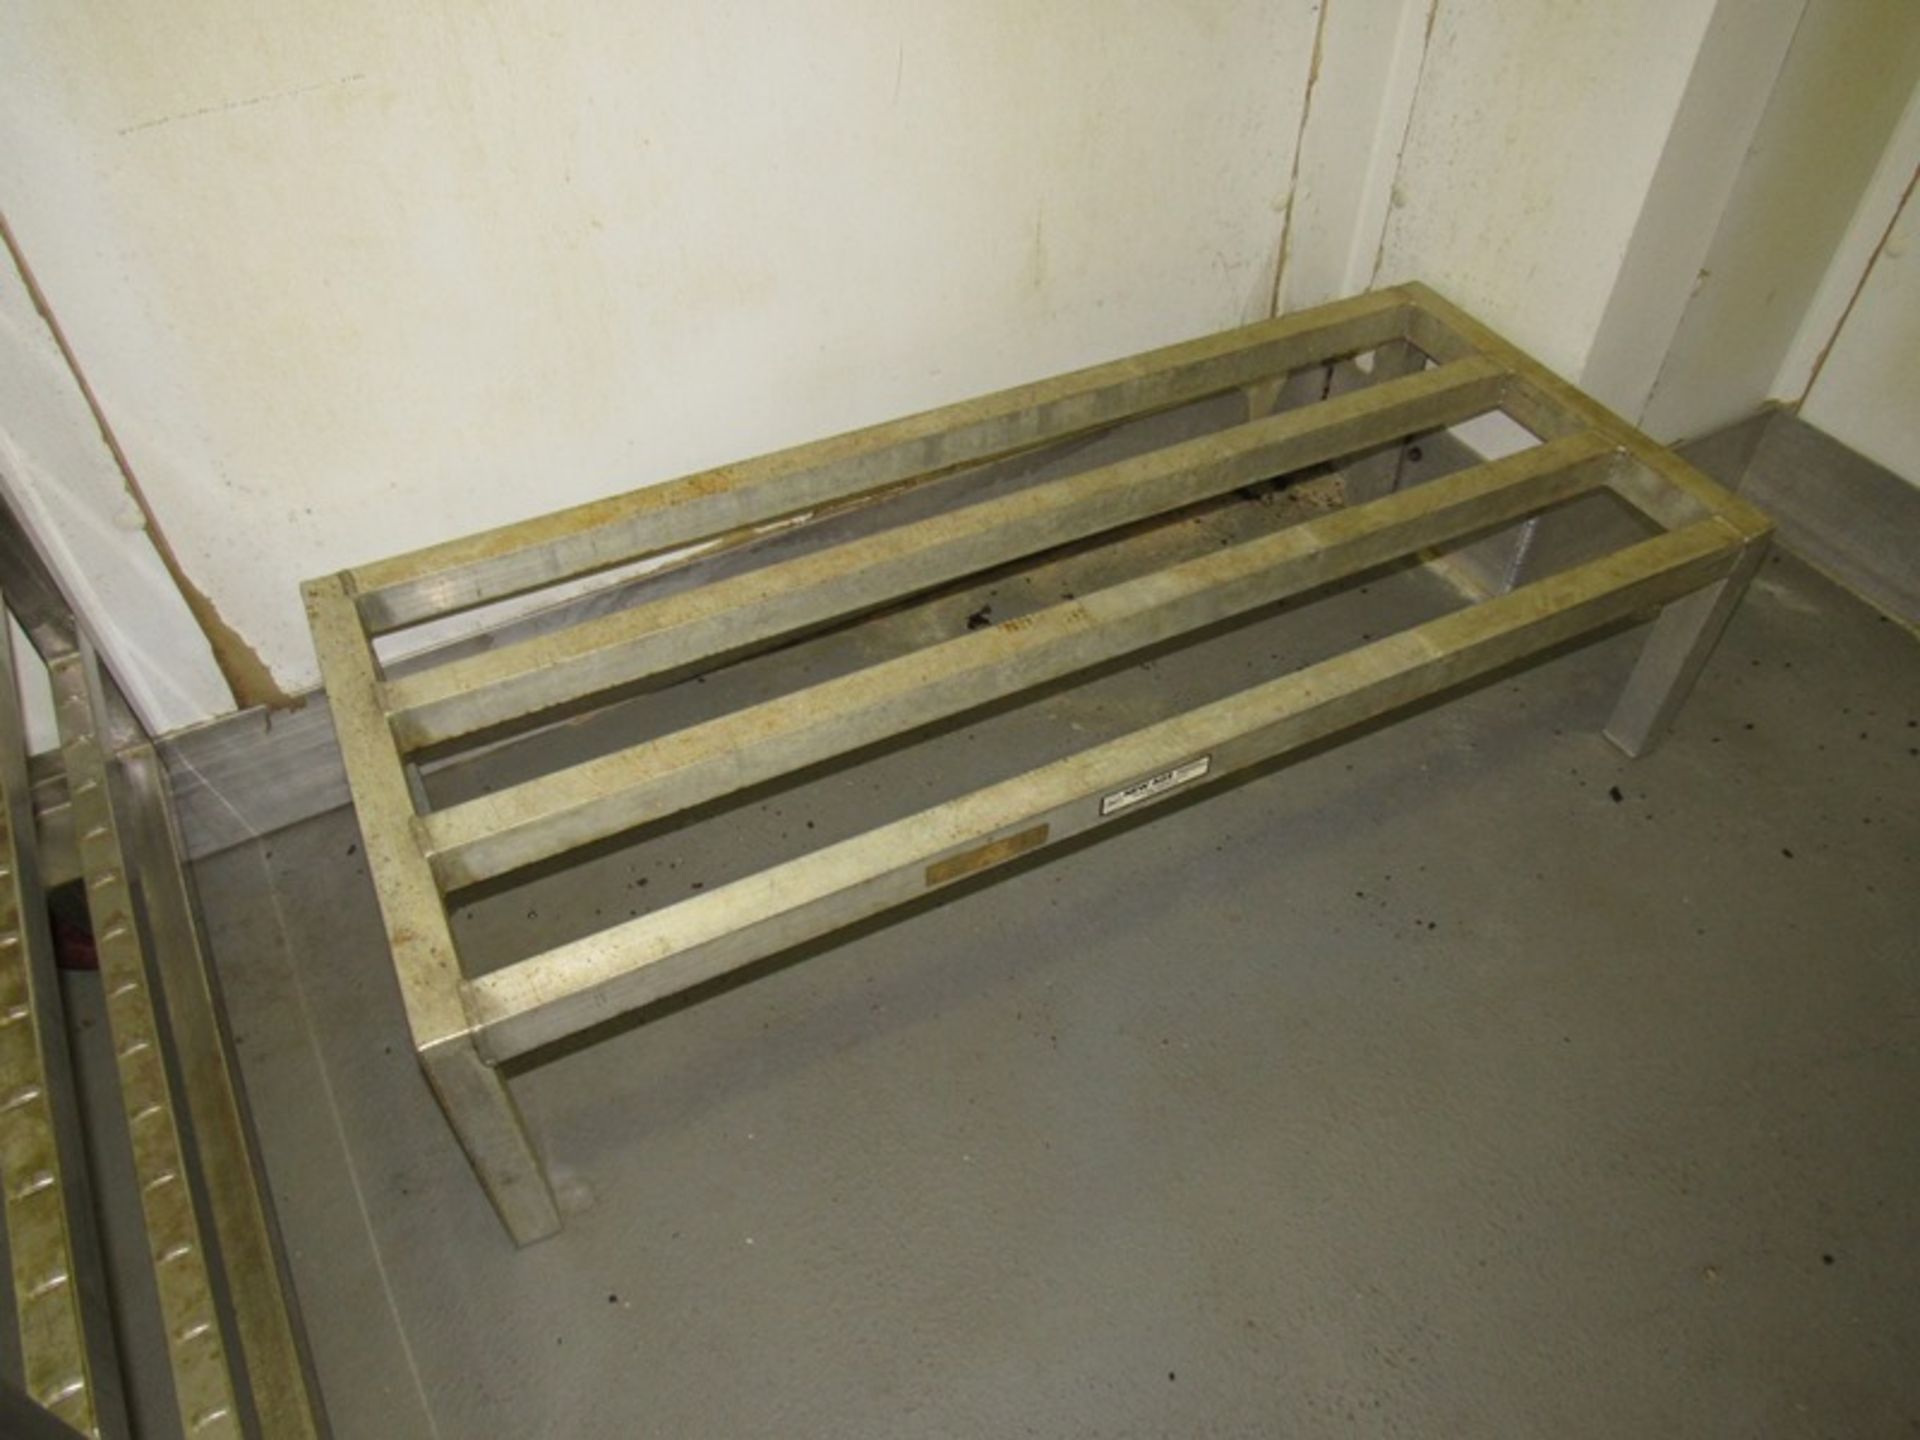 Lot of (4) Dunnage Racks, (3) 20" W X 4' L X 12" T, (1) 20" W X 37" X 7" T(No product or lotted